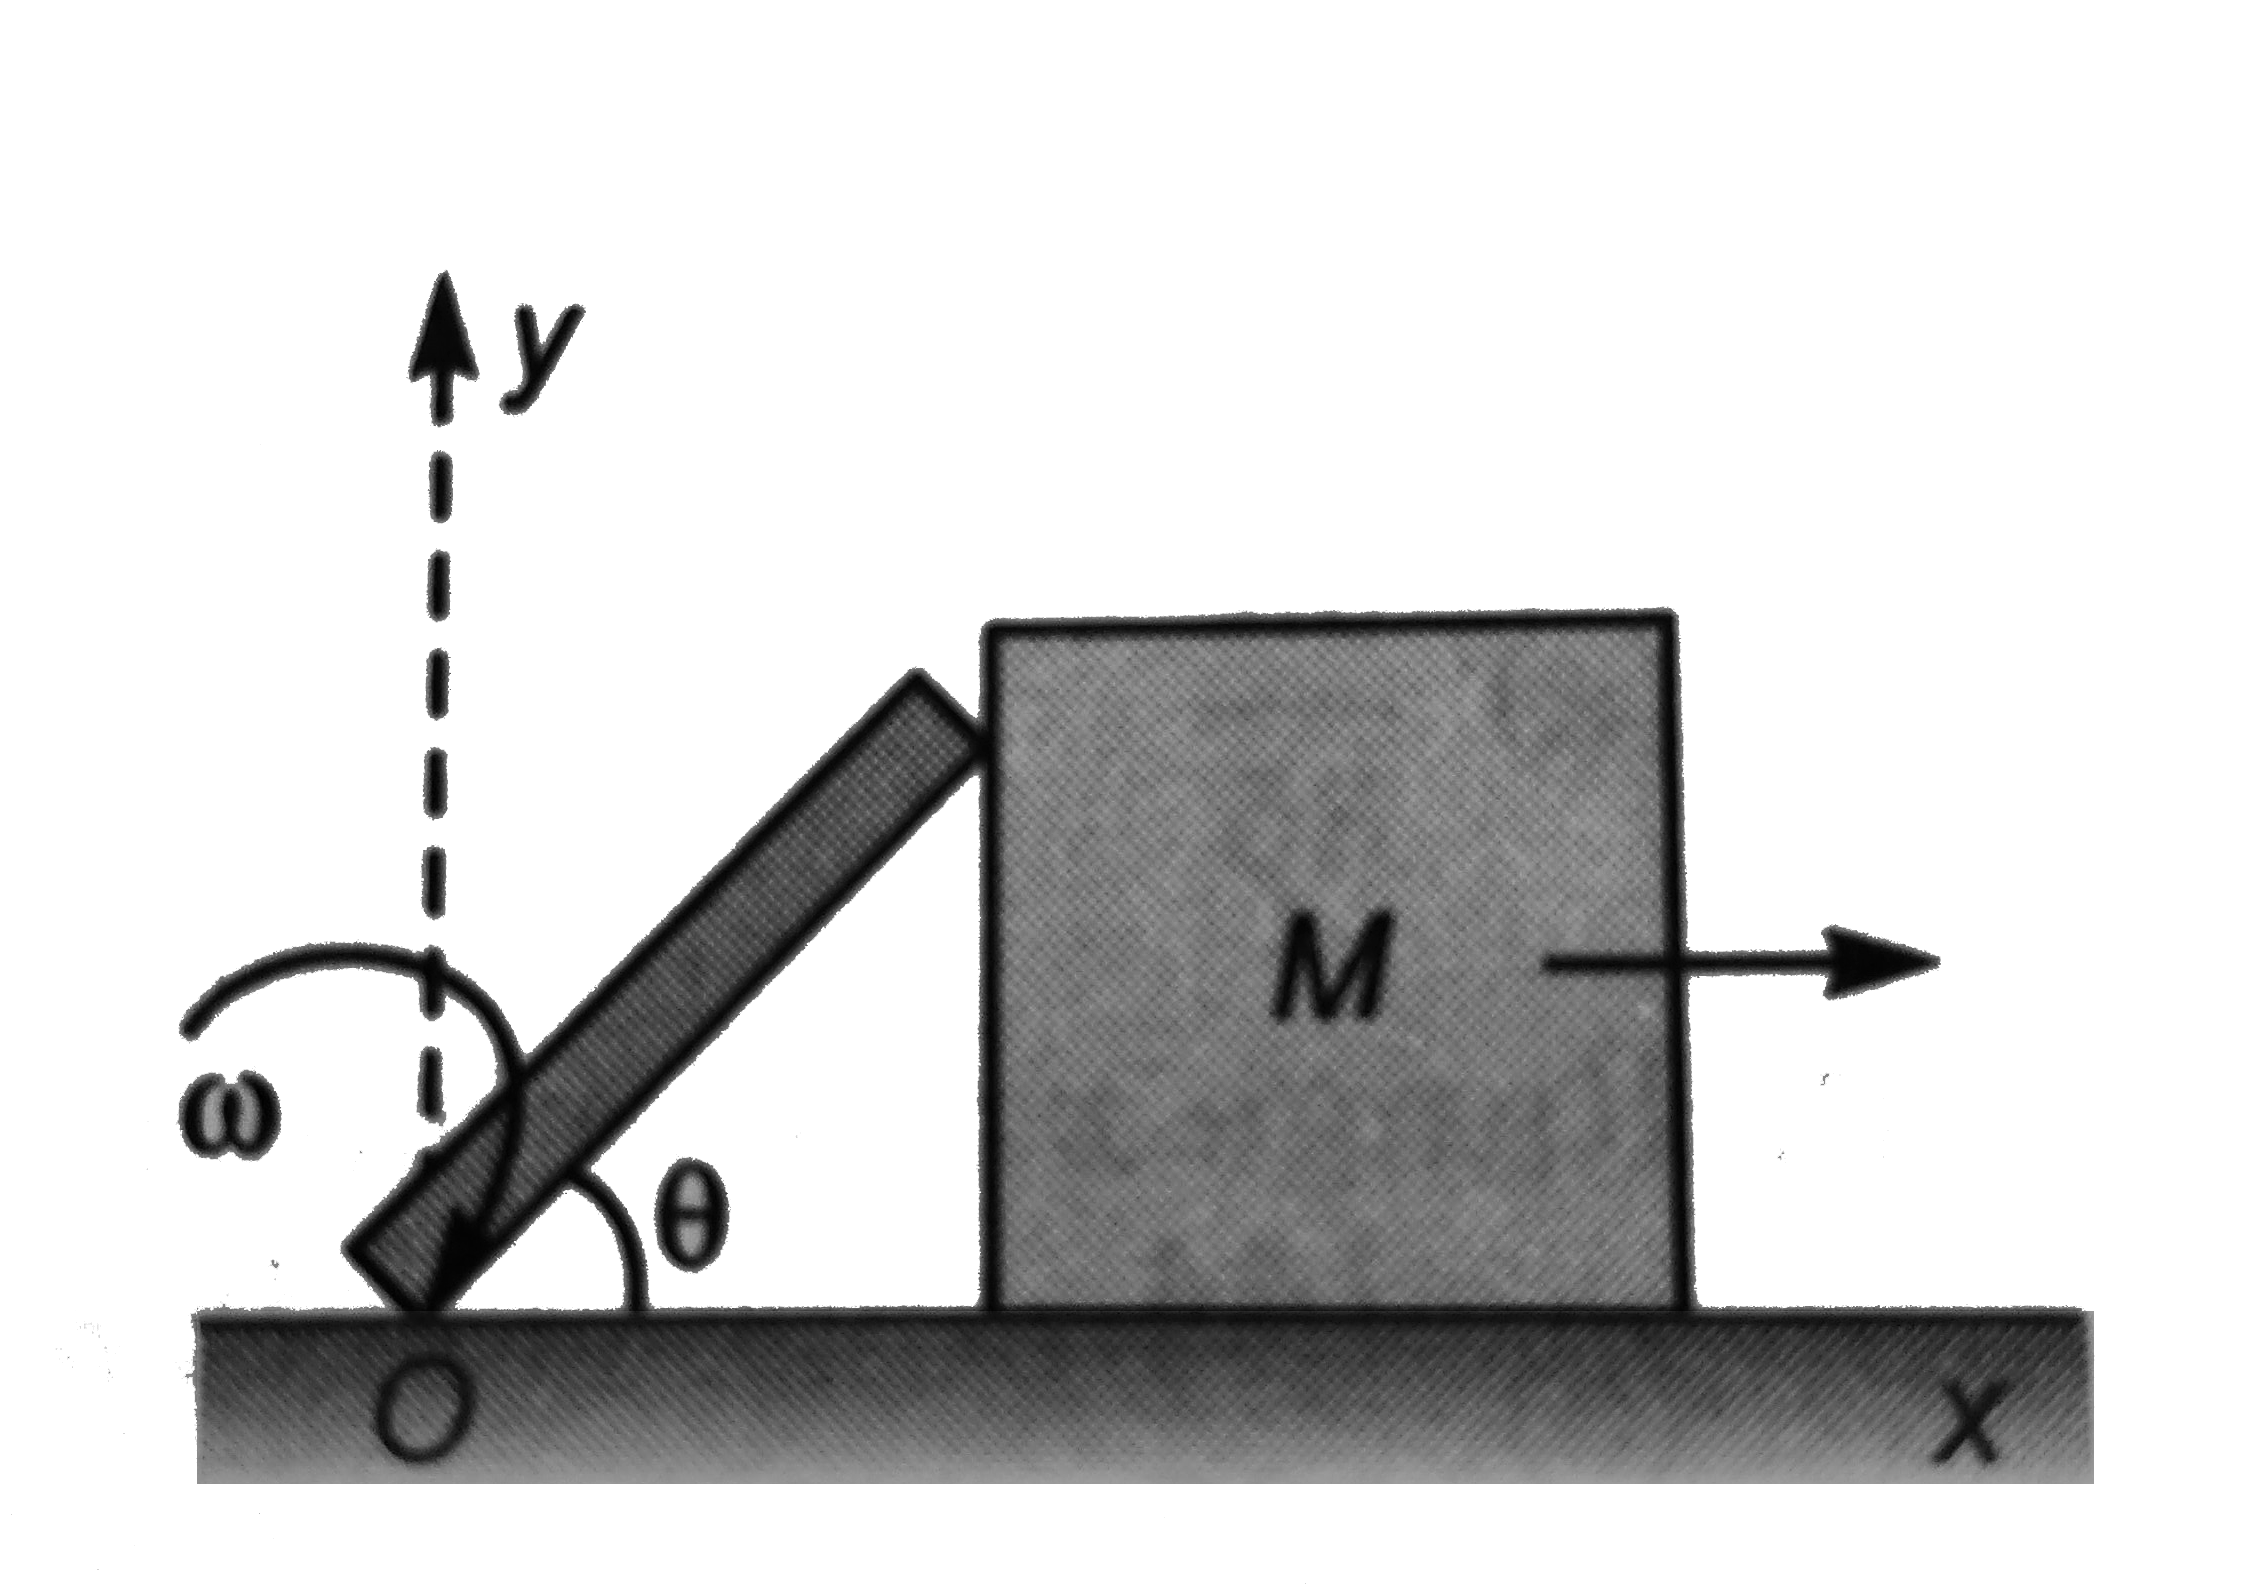 A uniform rod of mass m and length l is applied pivoted at point O. The rod is initially in vertical position and touching a block of mass M which is at rest on a horizontal surface. The rod is given a slight jerk and it starts rotating about point O this causes the block to move forward as shown The rod loses contact with the block at theta=30^(@) all surfaces are smooth now answer the following questions.   Q. The value of ratio M//m is
a) 2:3
b) 3:2
c) 4:3
d) 3:4